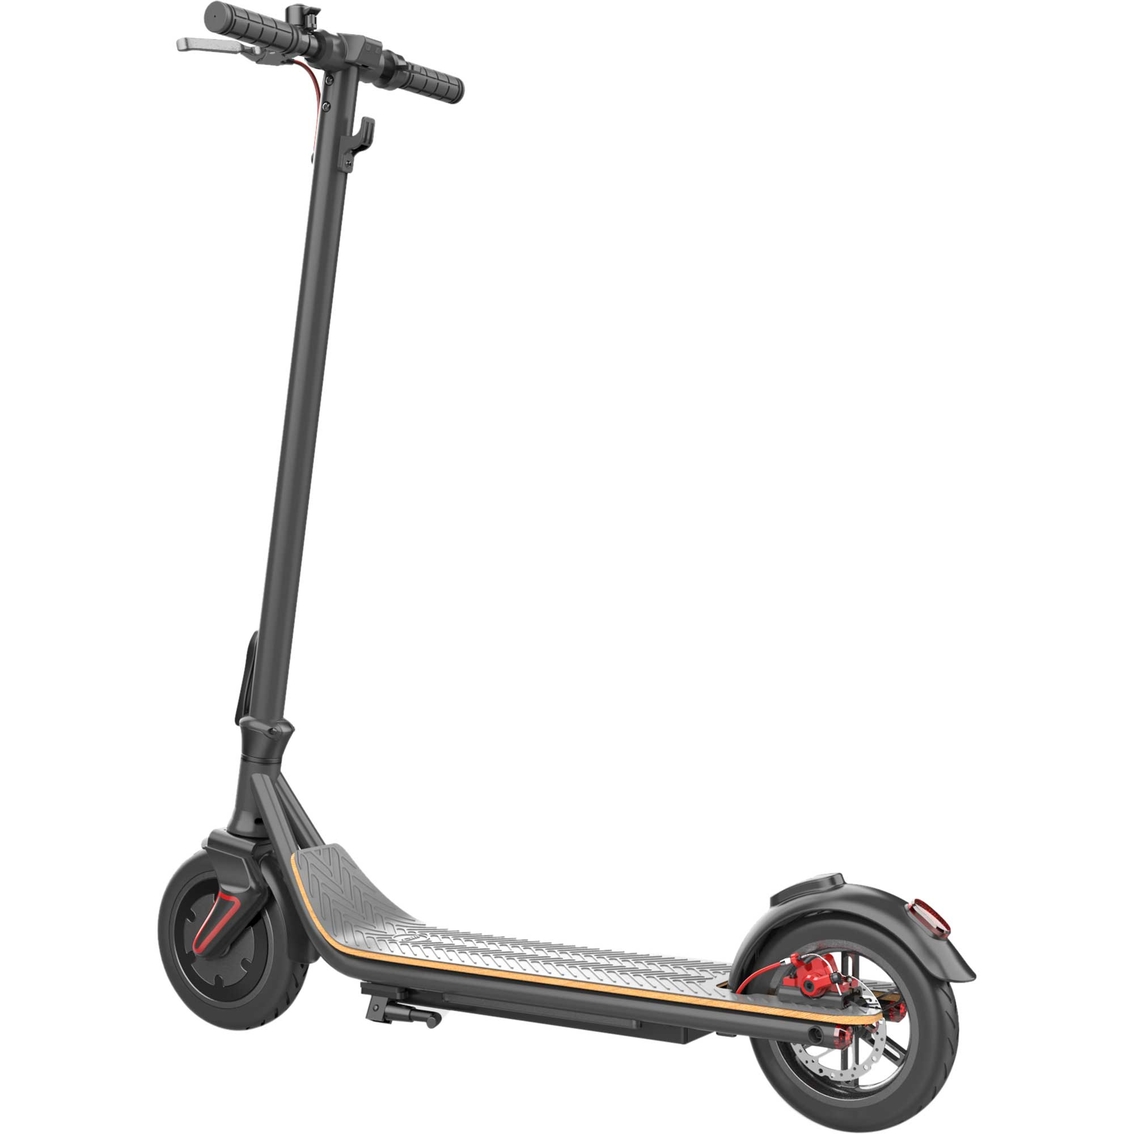 GlareWheel ES-S10X Foldable 350W Electric High Speed City Commuter Scooter - Image 2 of 6